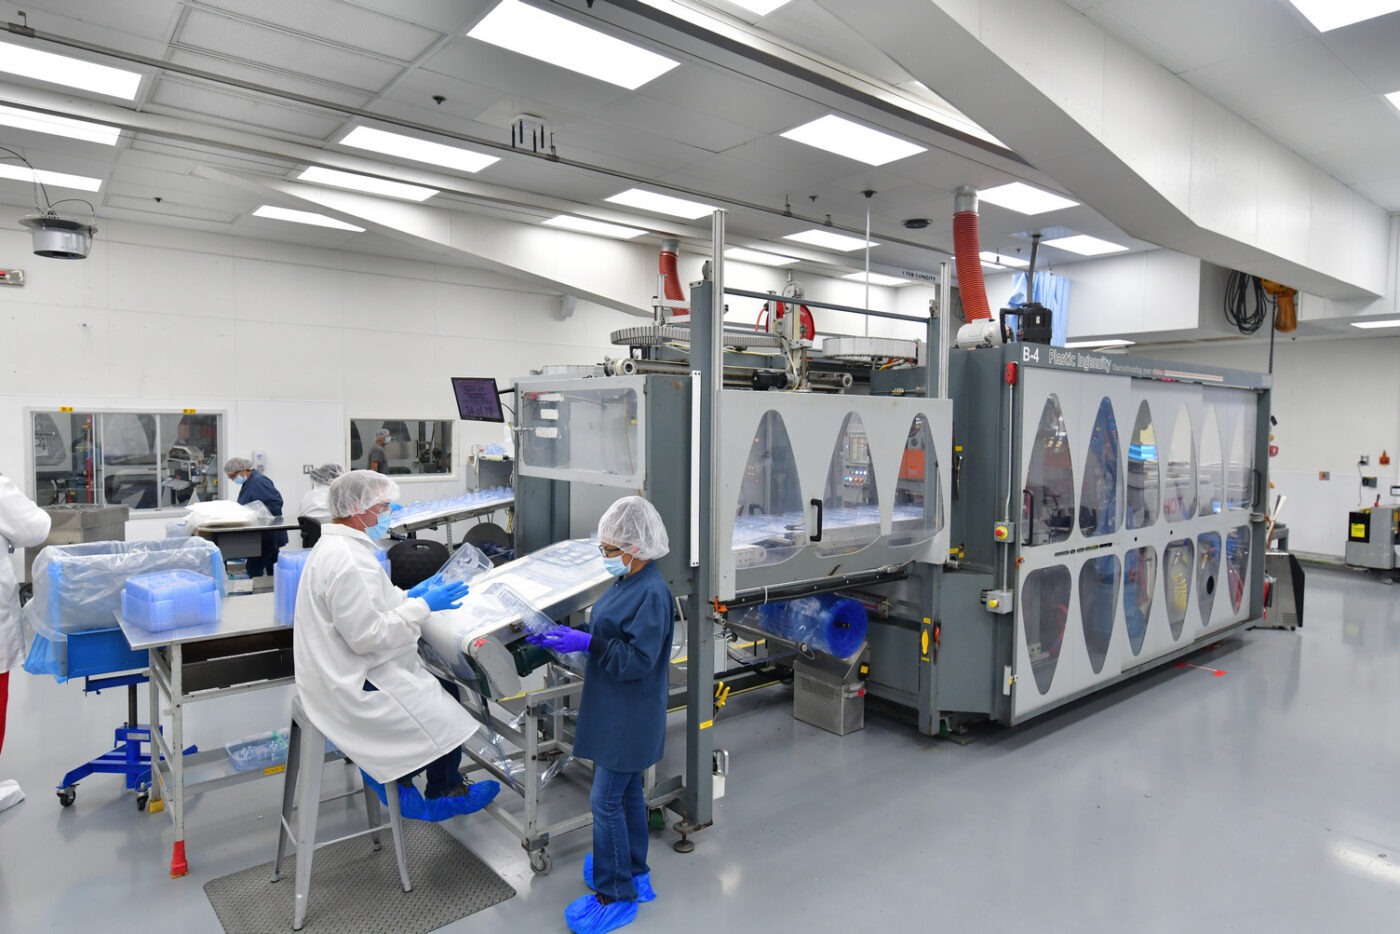 Plastic Ingenuity Clean Room for Healthcare and Medical Device Packaging